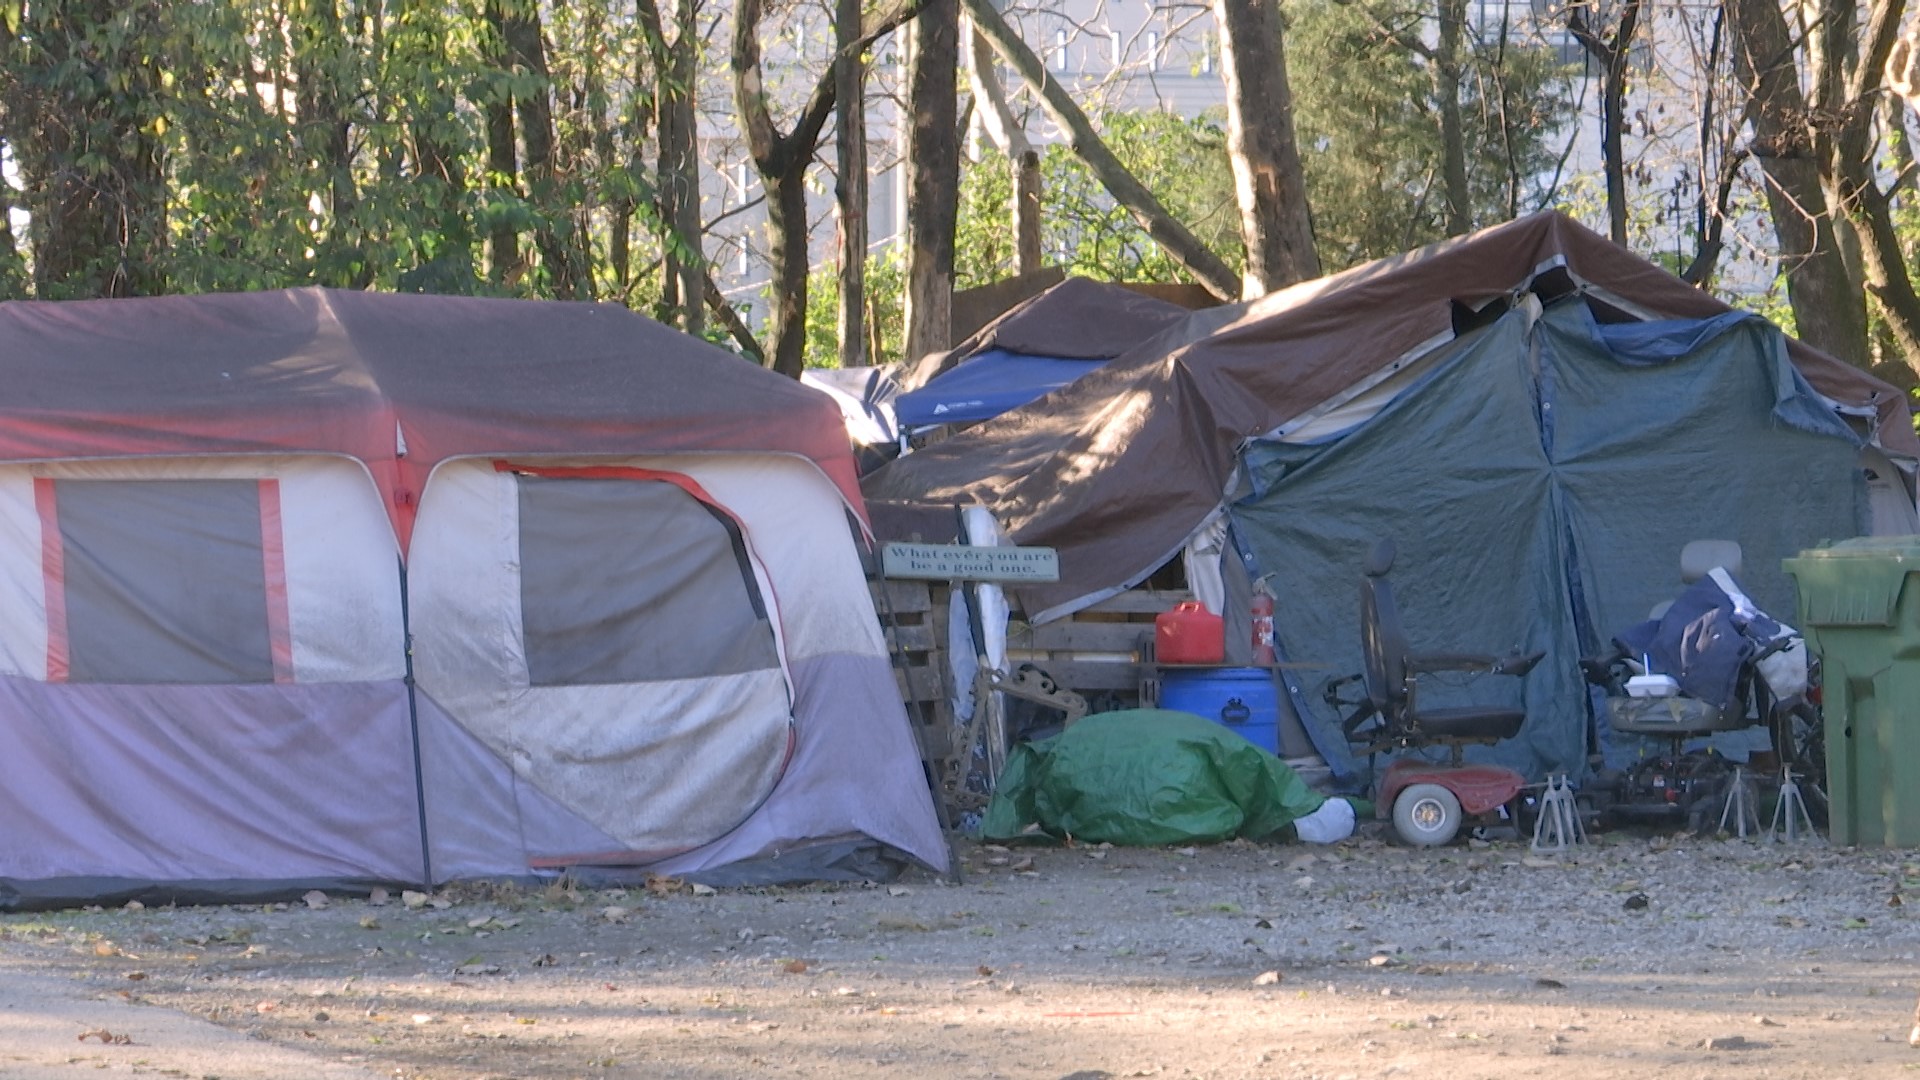 Instead of bringing food, clothing and other supplies directly to the homeless camps, the City of Huntsville is urging citizens to rethink their charitable efforts.